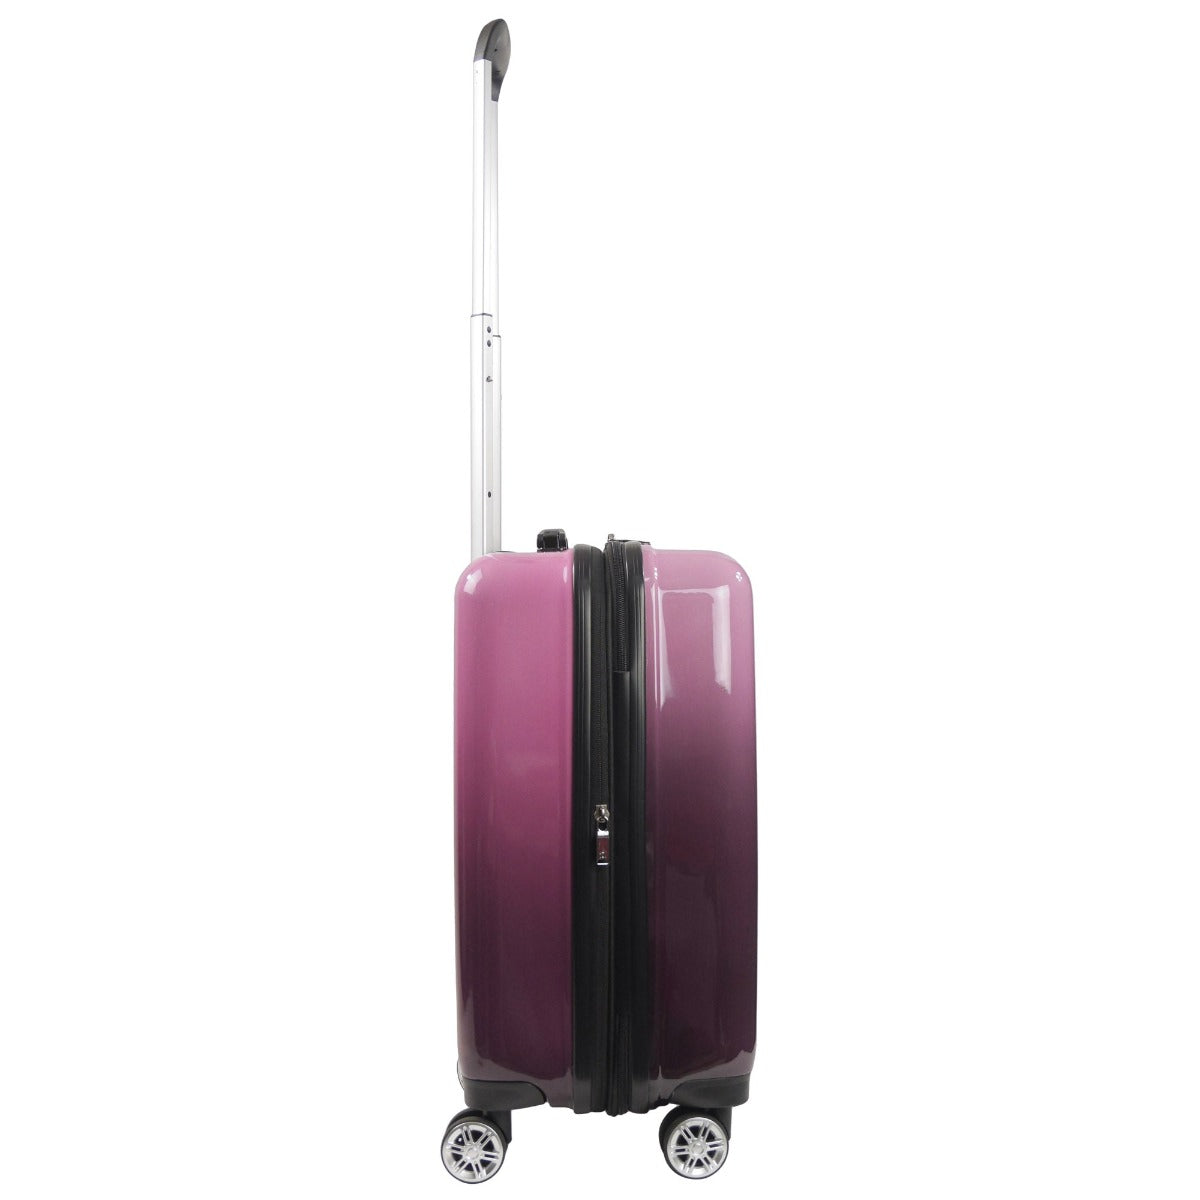 Ful Impulse Ombre Hardside Spinner Suitcase 22" Luggage, Pink